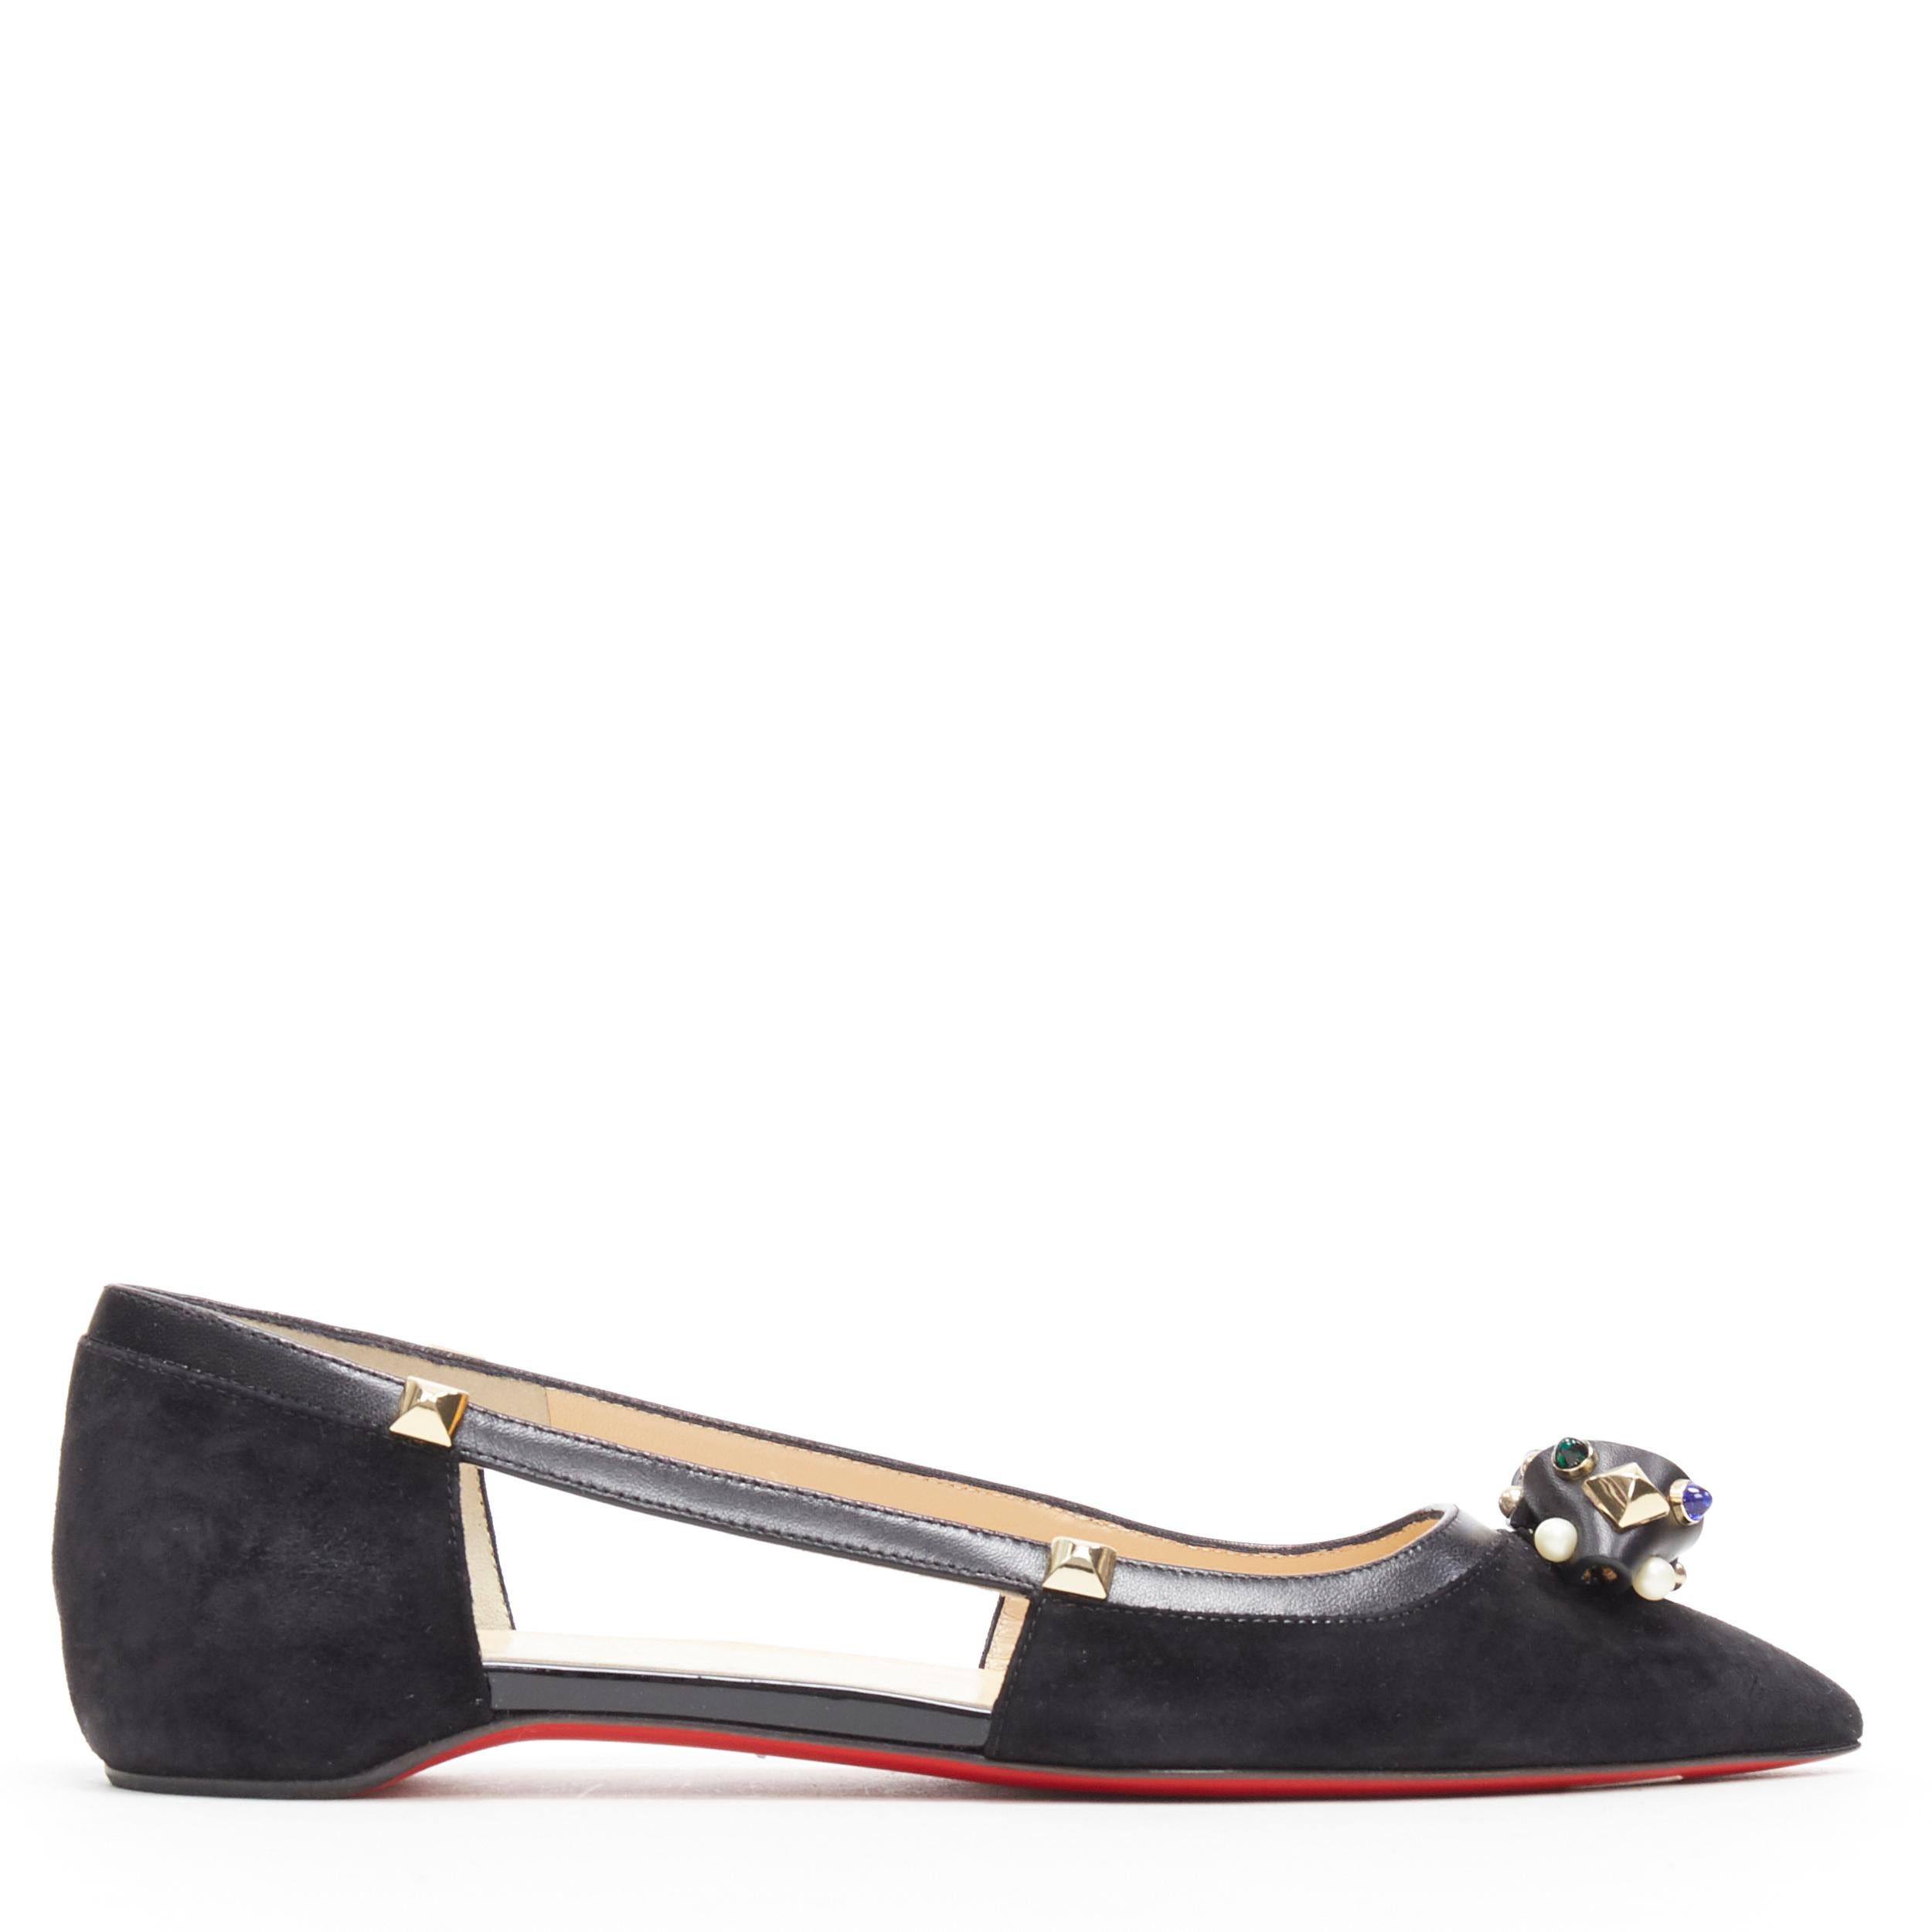 CHRISTIAN LOUBOUTIN Tudor Young black suede gripoix metal box flats EU36
Brand: Christian Louboutin
Designer: Christian Louboutin
Model Name / Style: Tudor Young
Material: Suede
Color: Black
Pattern: Solid
Extra Detail: Flat (Under 1 in) heel